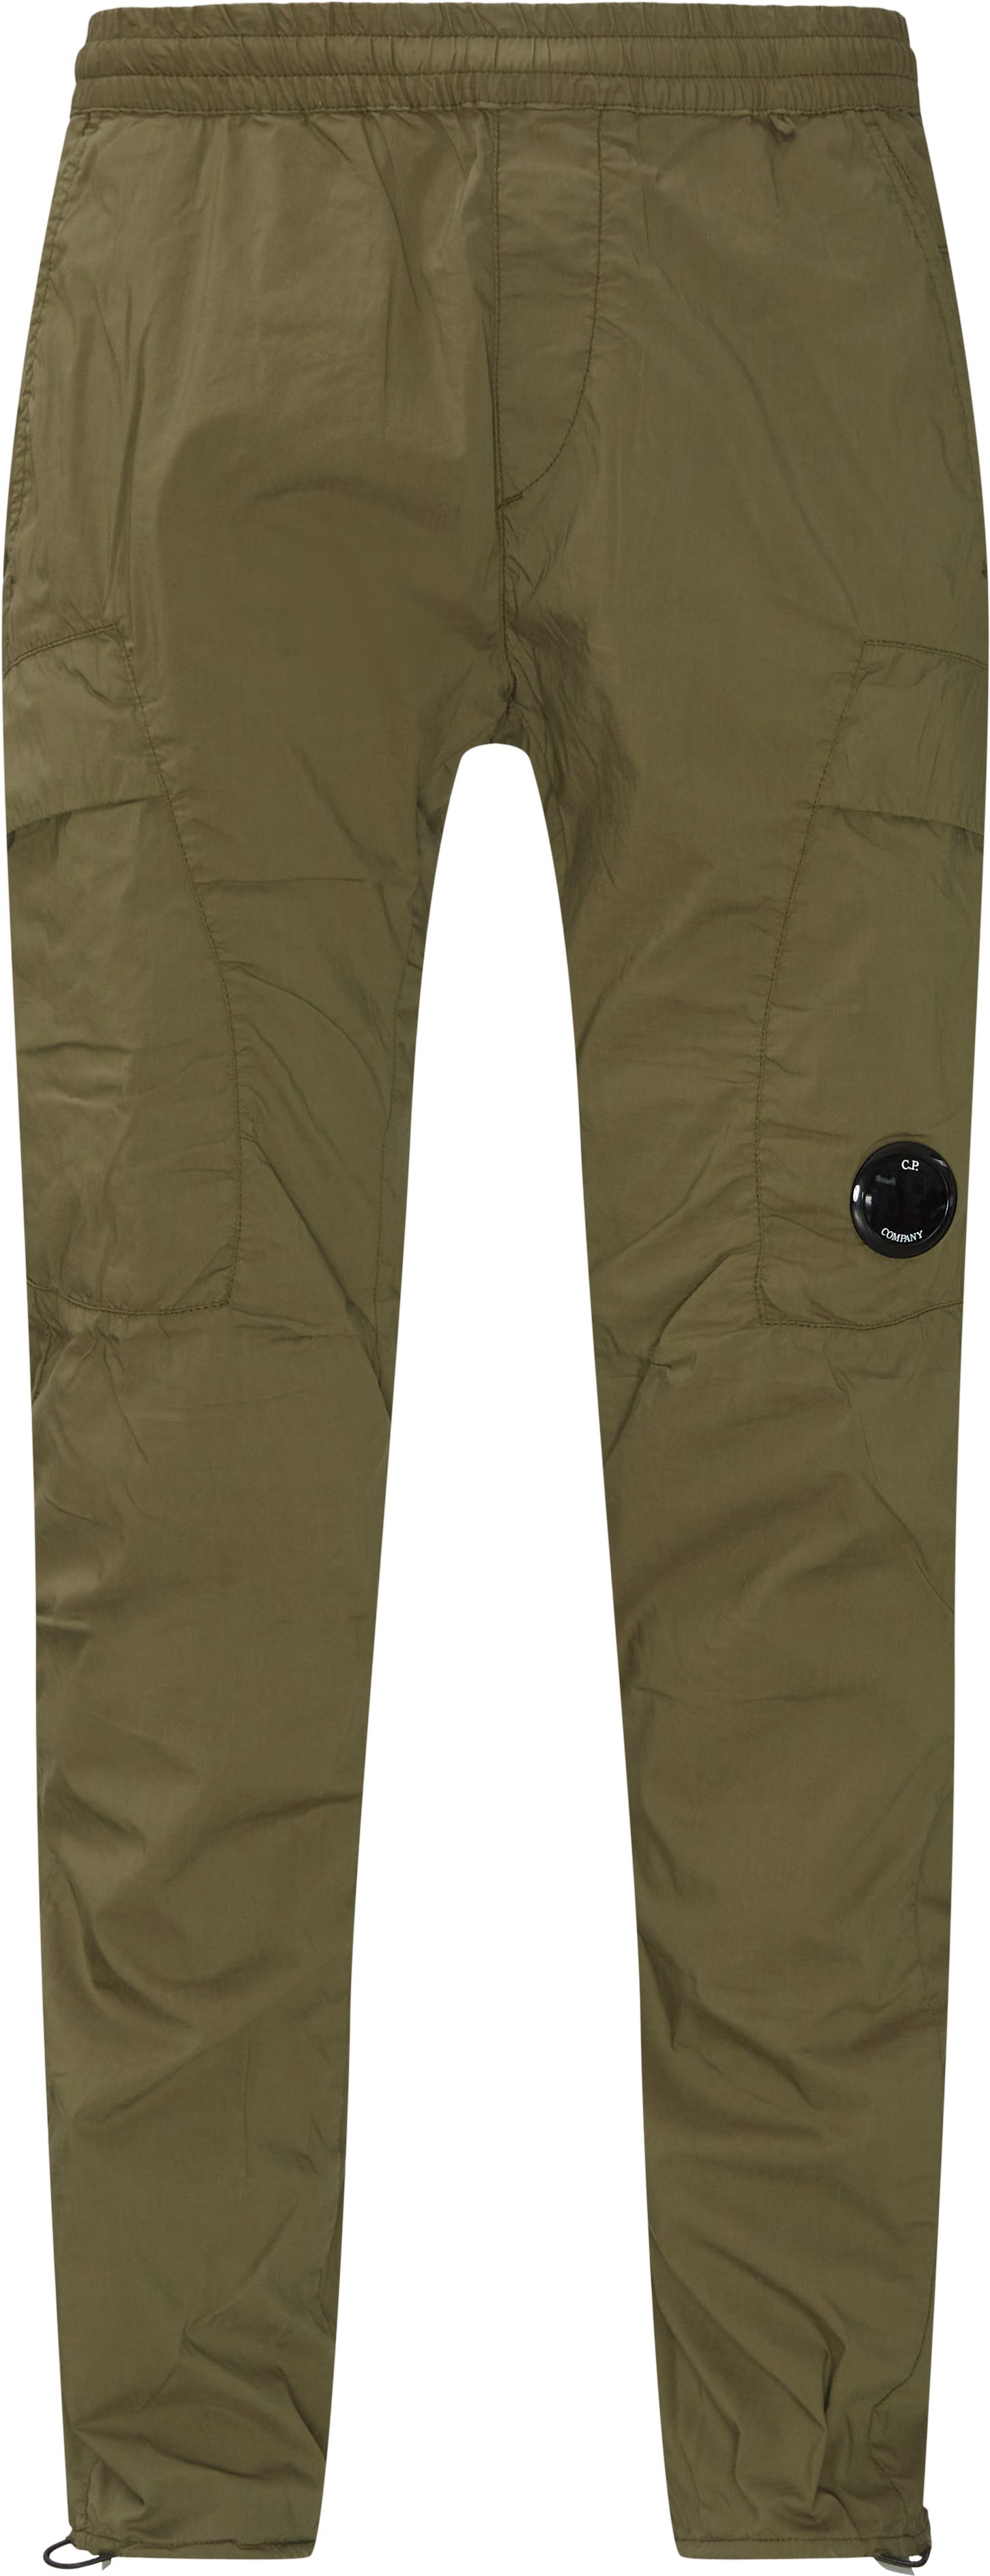 Trousers - Regular fit - Army